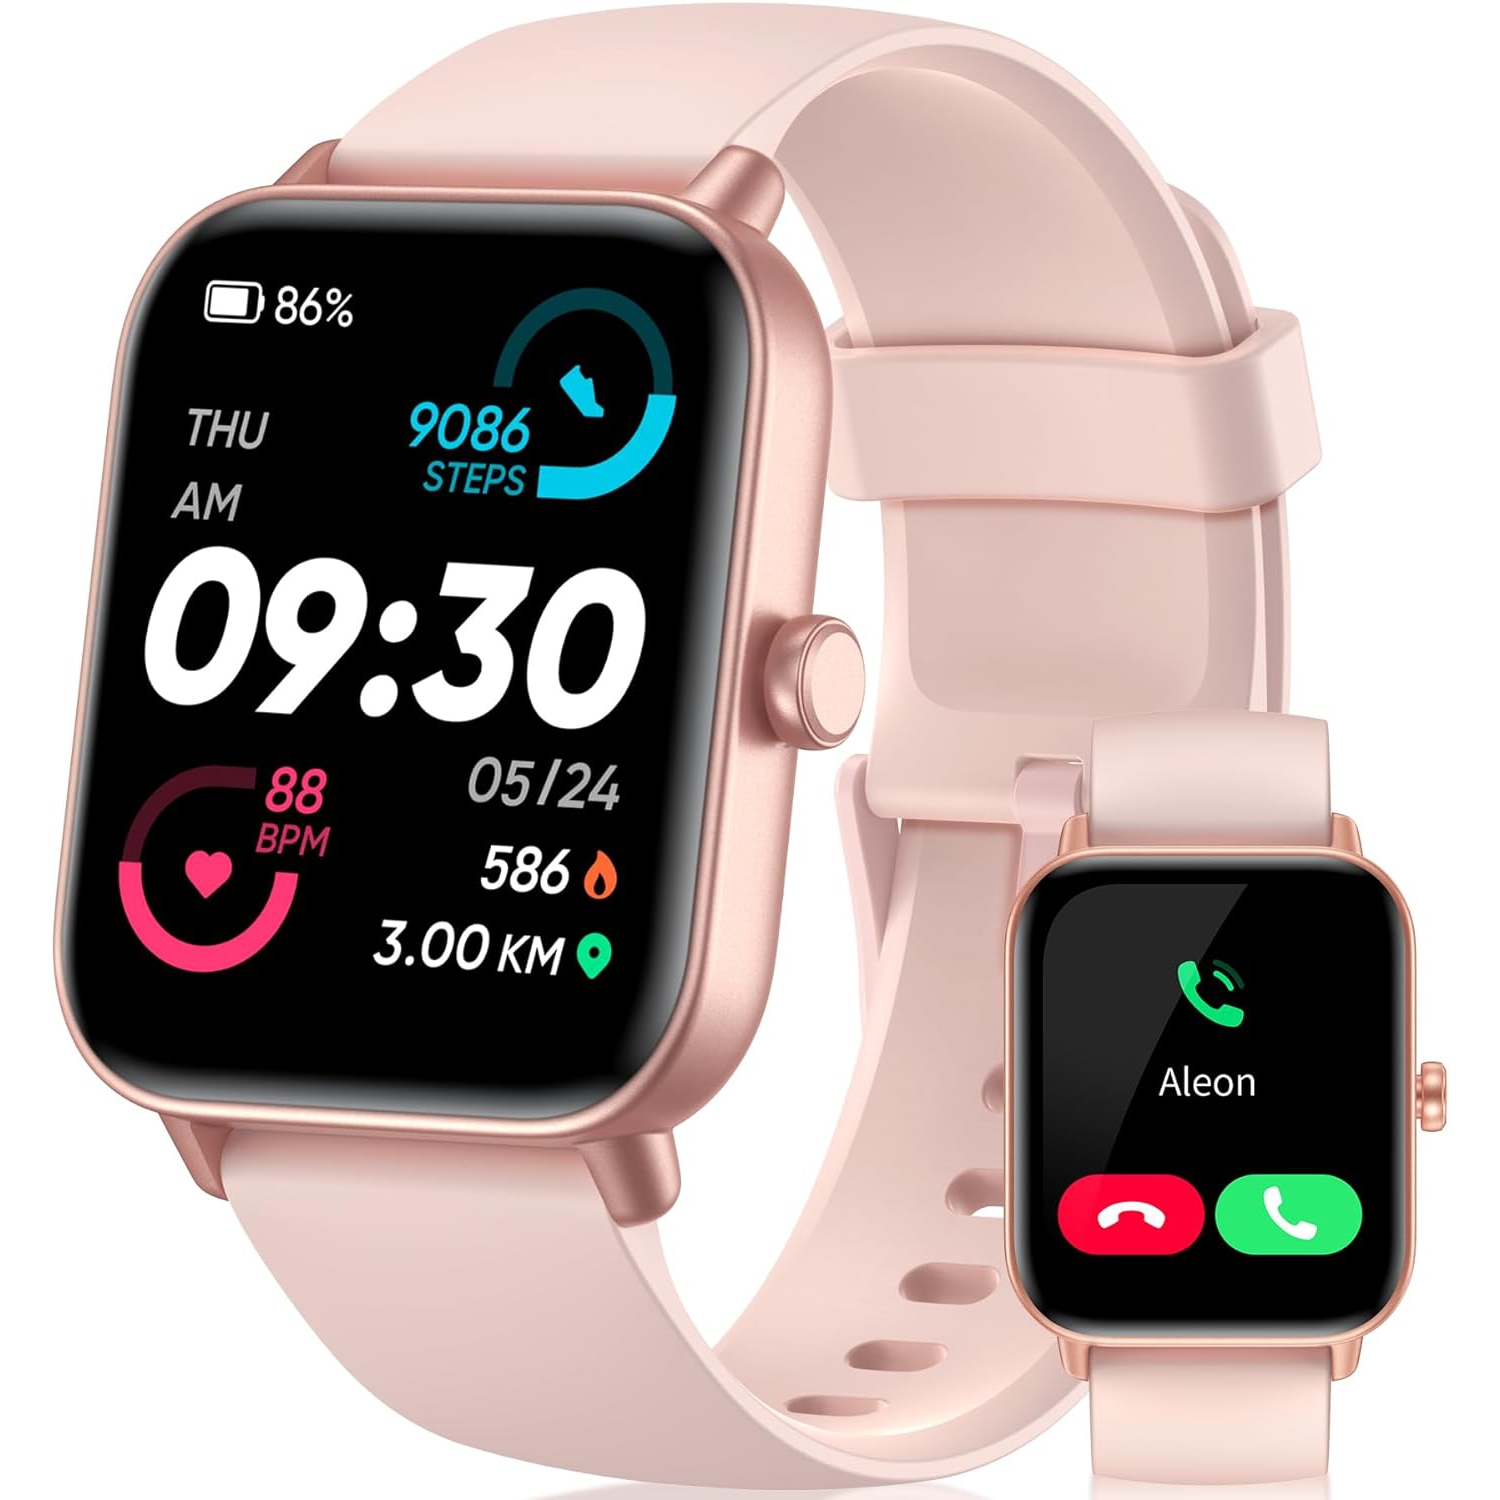 Gleam Up Smart Watch for Men Women | Fitness Tracker with Heart Rate Blood Oxygen Sleep Monitor 100 Sports Modes IP68 Waterproof Smart Watch for Android and iPhones (Pink)